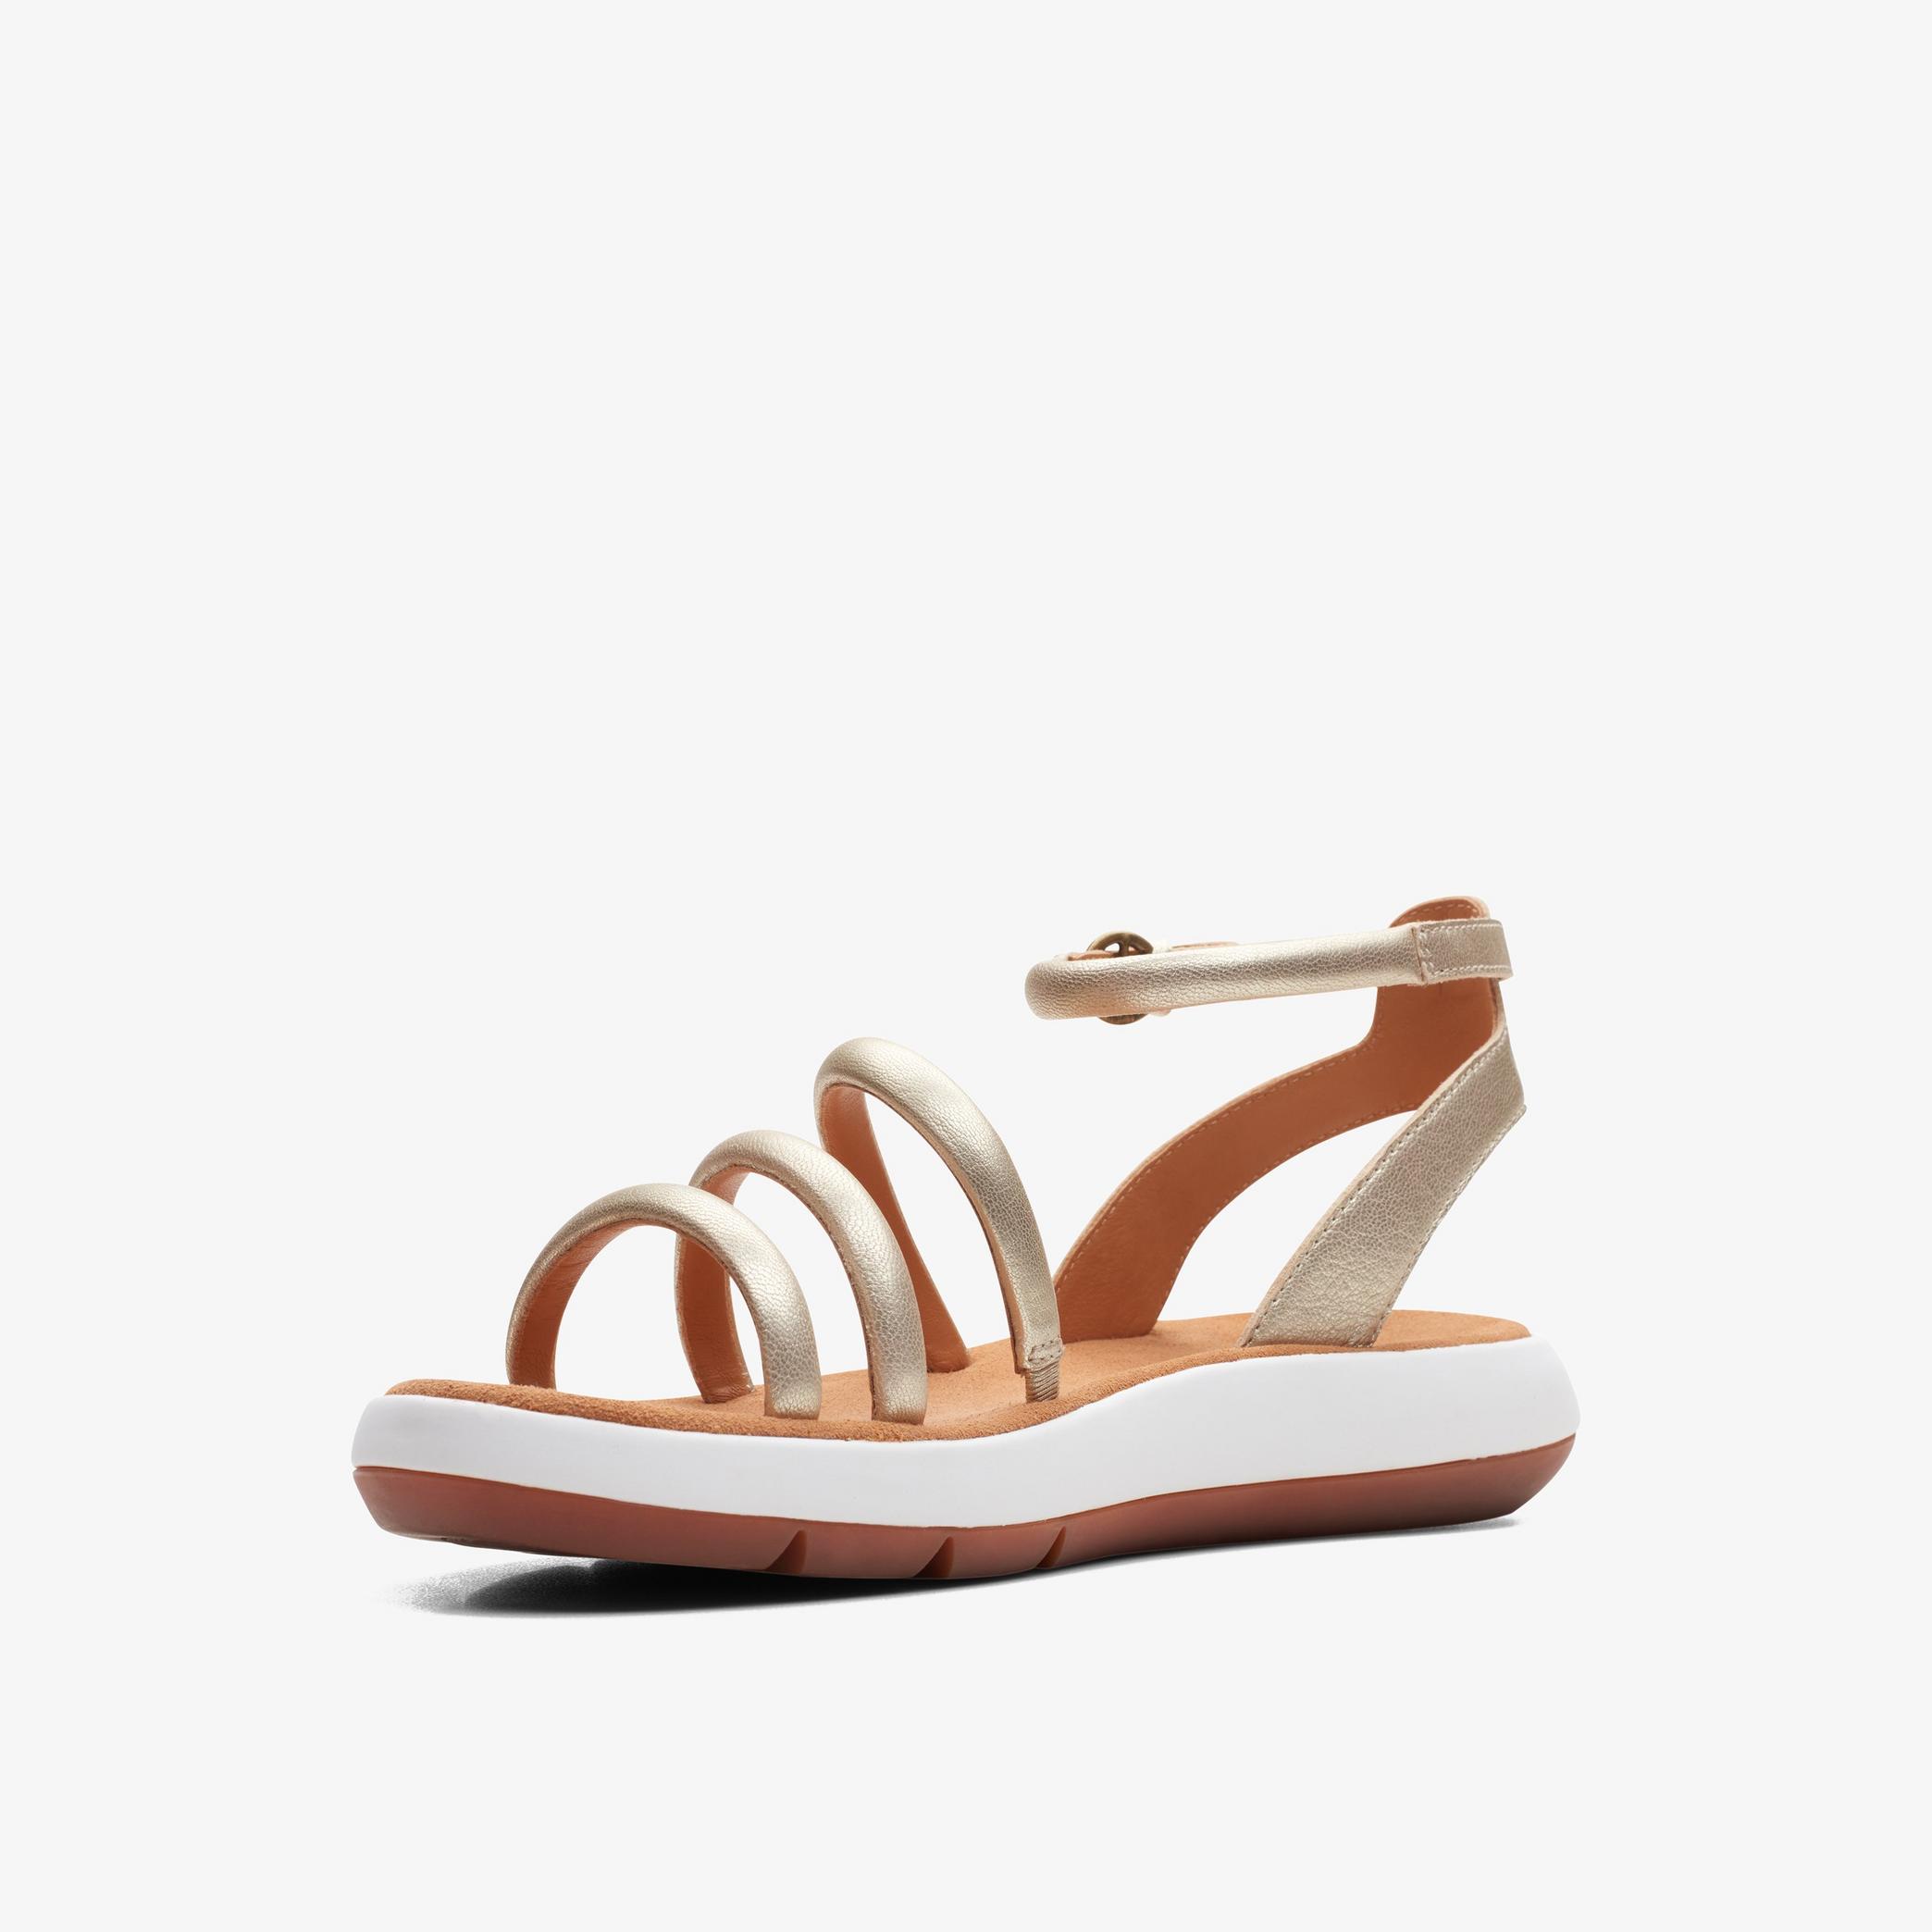 Jemsa Style Champagne Leather Flat Sandals, view 4 of 6